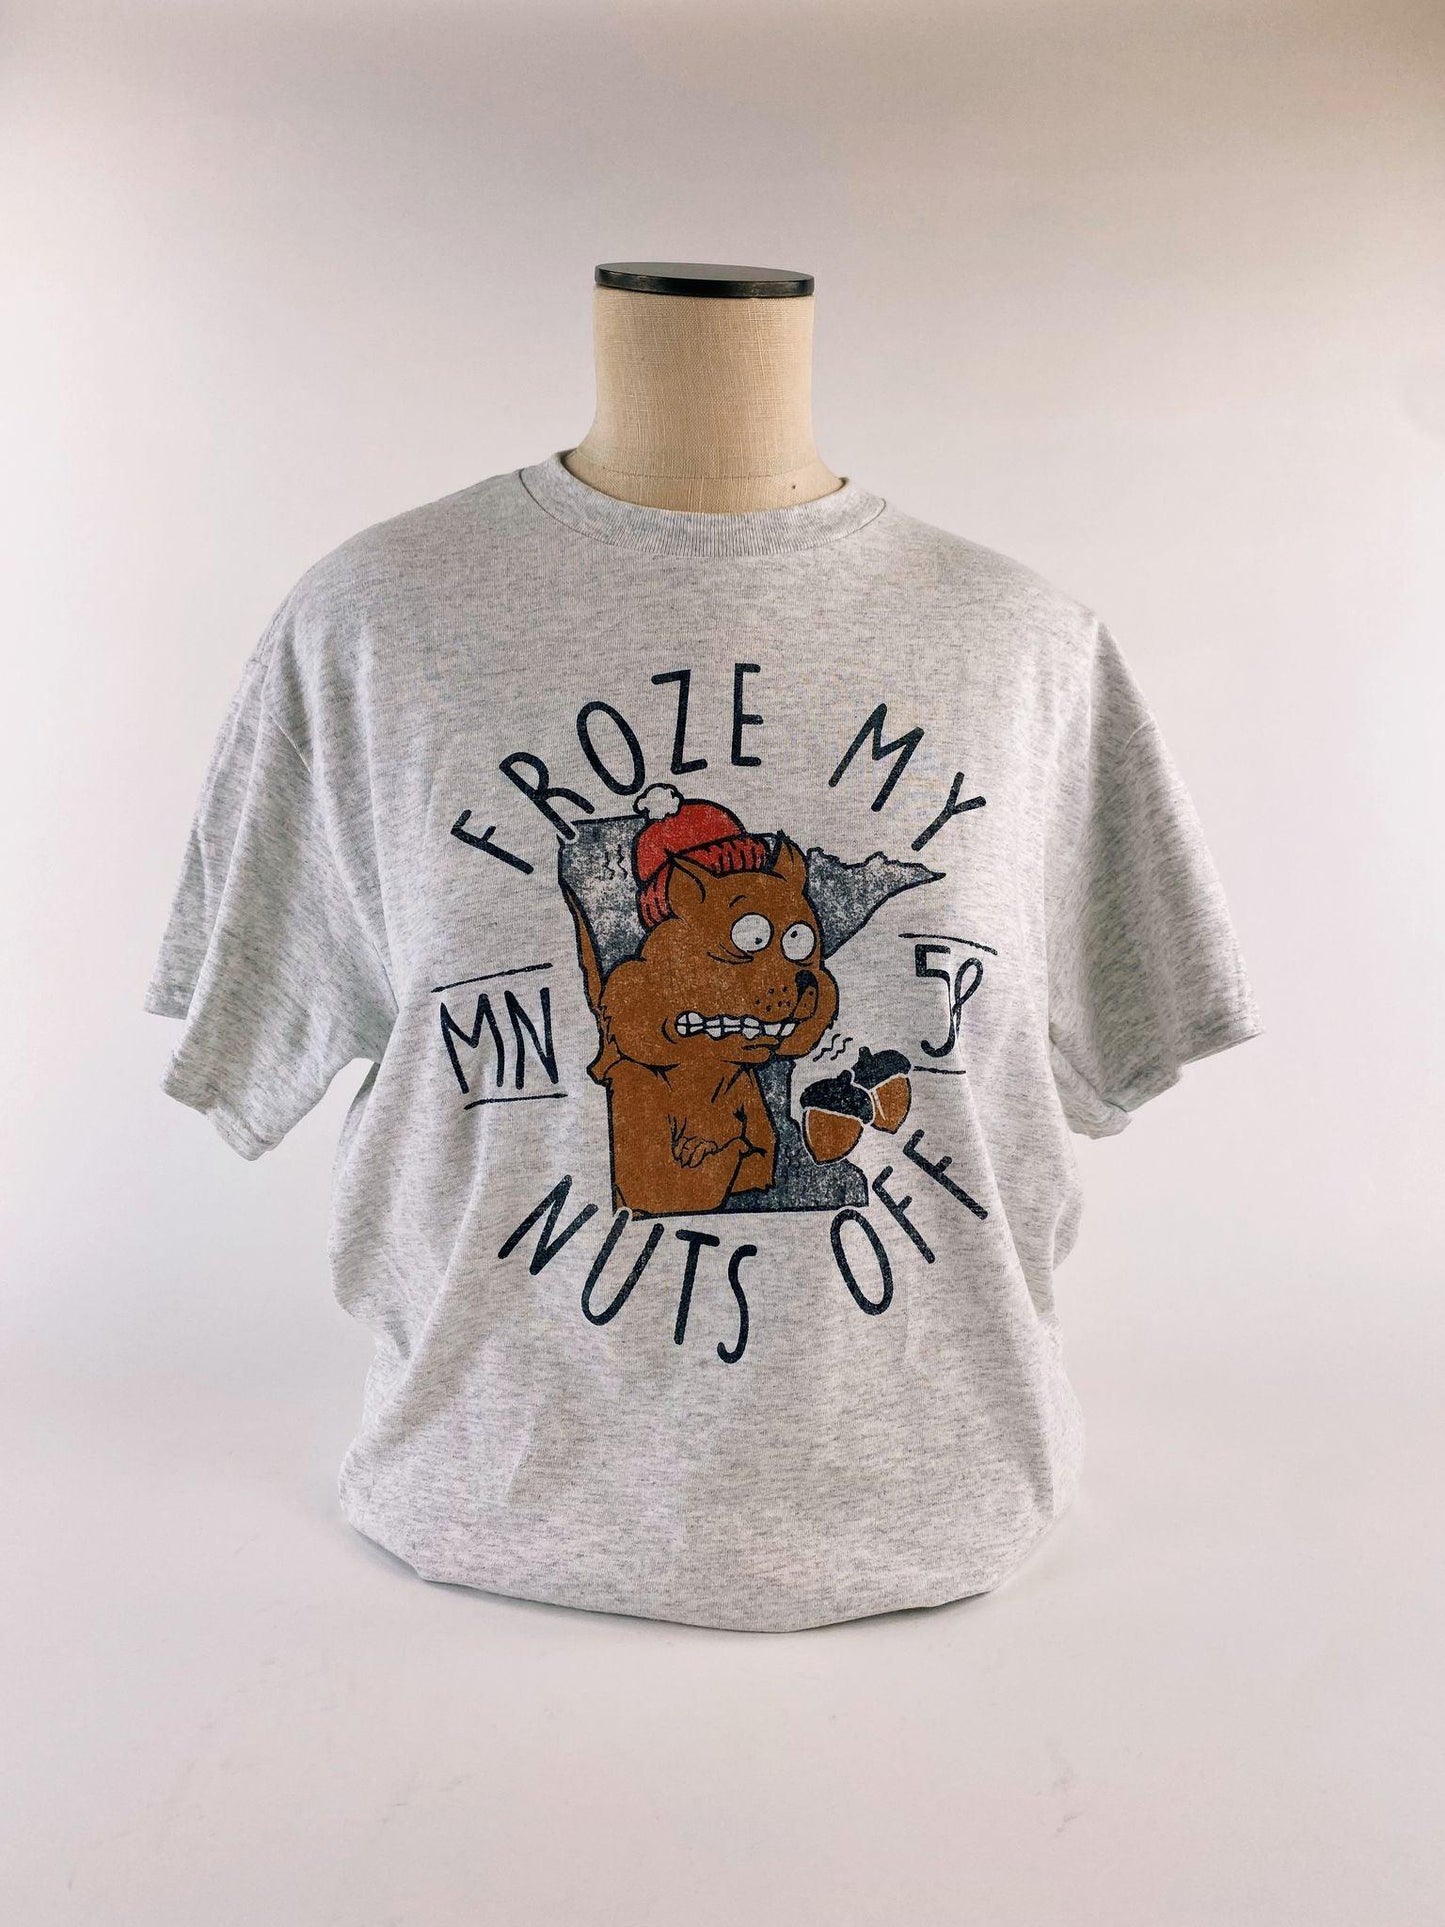 Chill Zone Tee - Love From USA